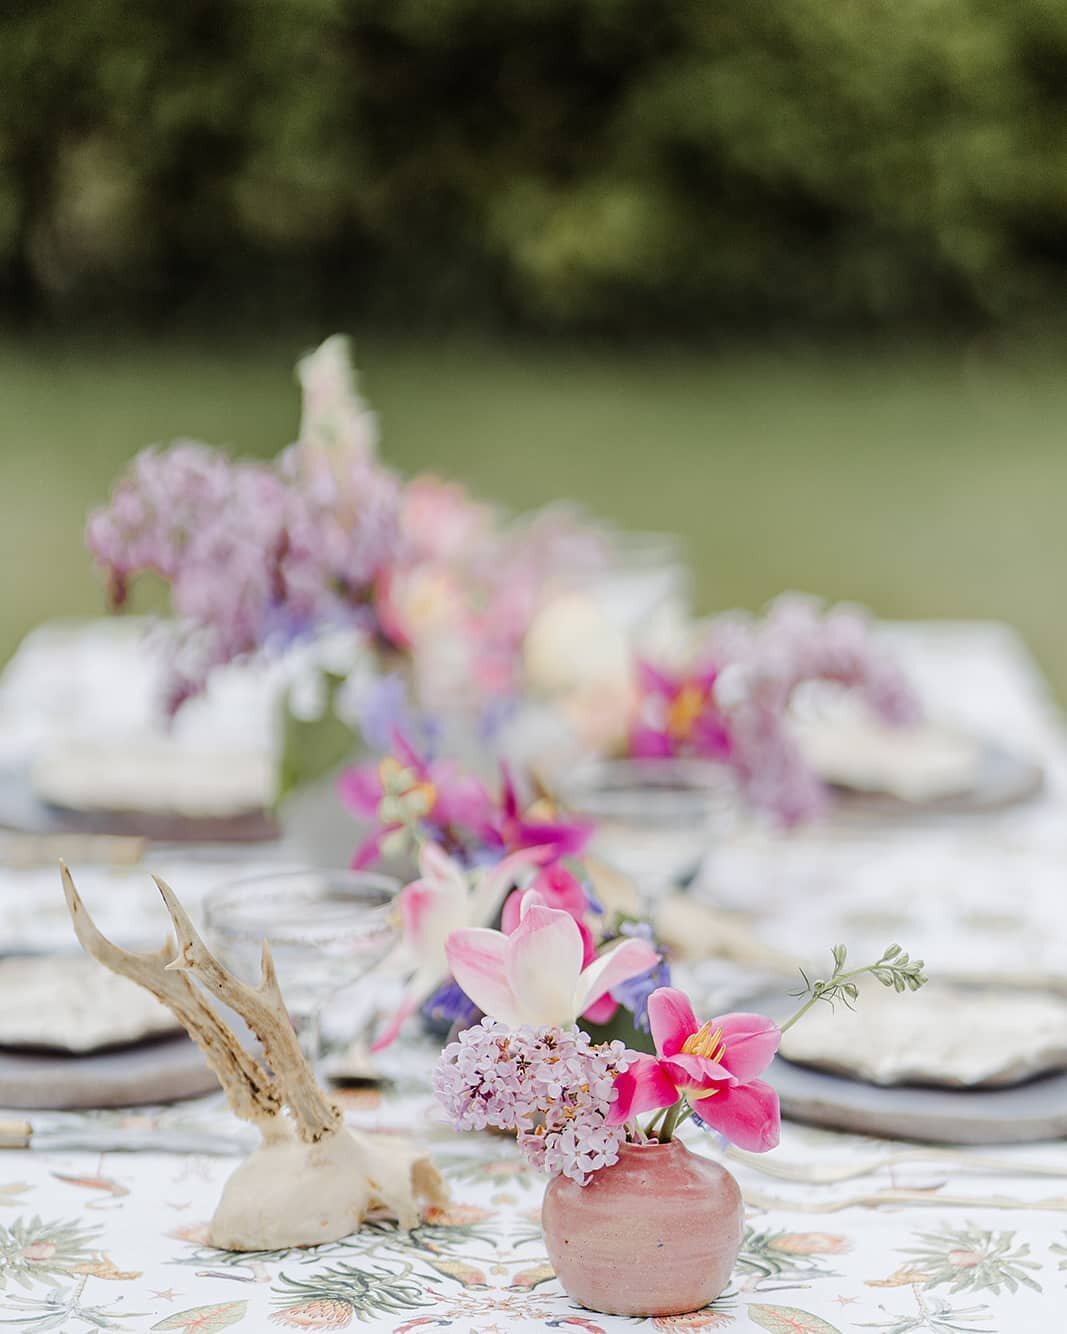 A light sprinkling of Spring flowers in the most delicious containers made by @juliereillyceramics.
.
.
.
Tablecloth @sarahfortescuedesign
Photo @chloeelyphotography
Food and styling @bashbites

#underthefloralspell #sustainablefloristry #foamfreeflo